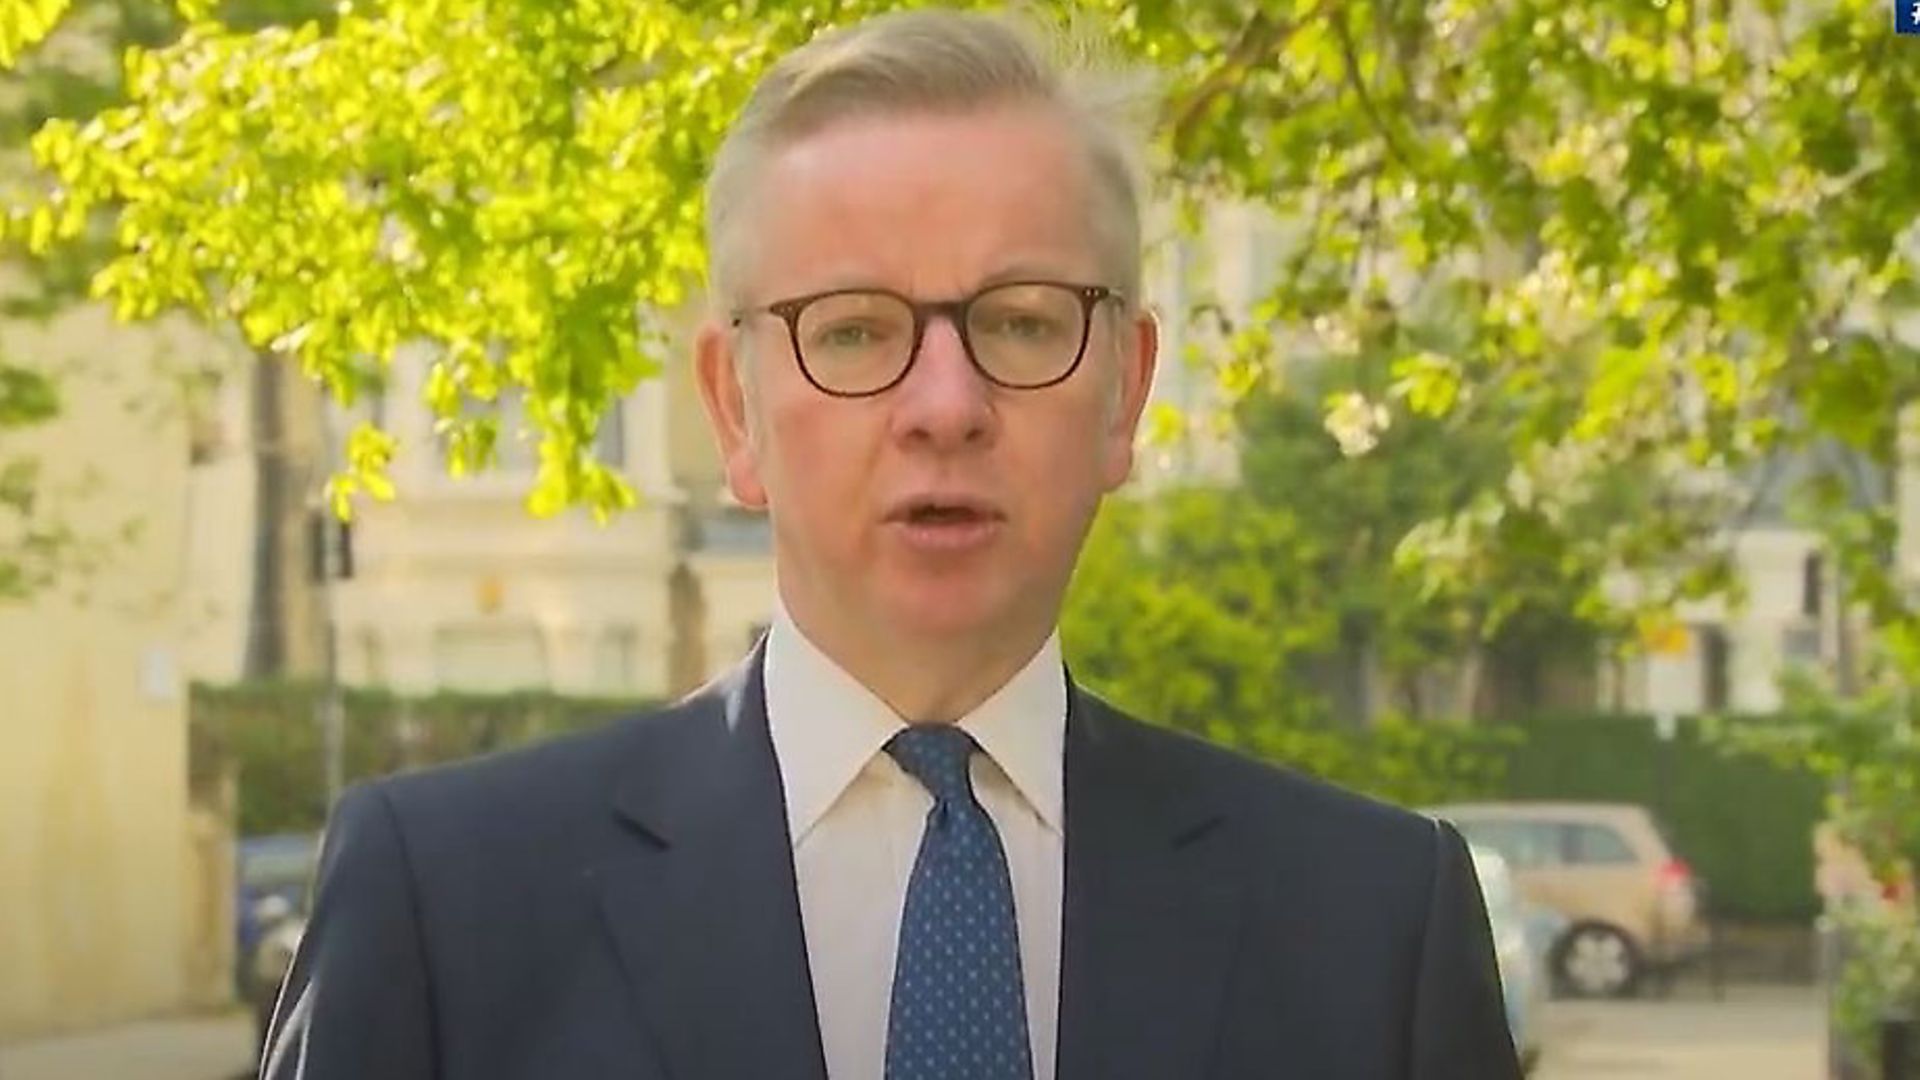 Chancellor of the Duchy of Lancaster, Michael Gove, appearing on Sophy Ridge this morning April 19. Picture: Sophy Ridge on Sunday - Credit: Archant